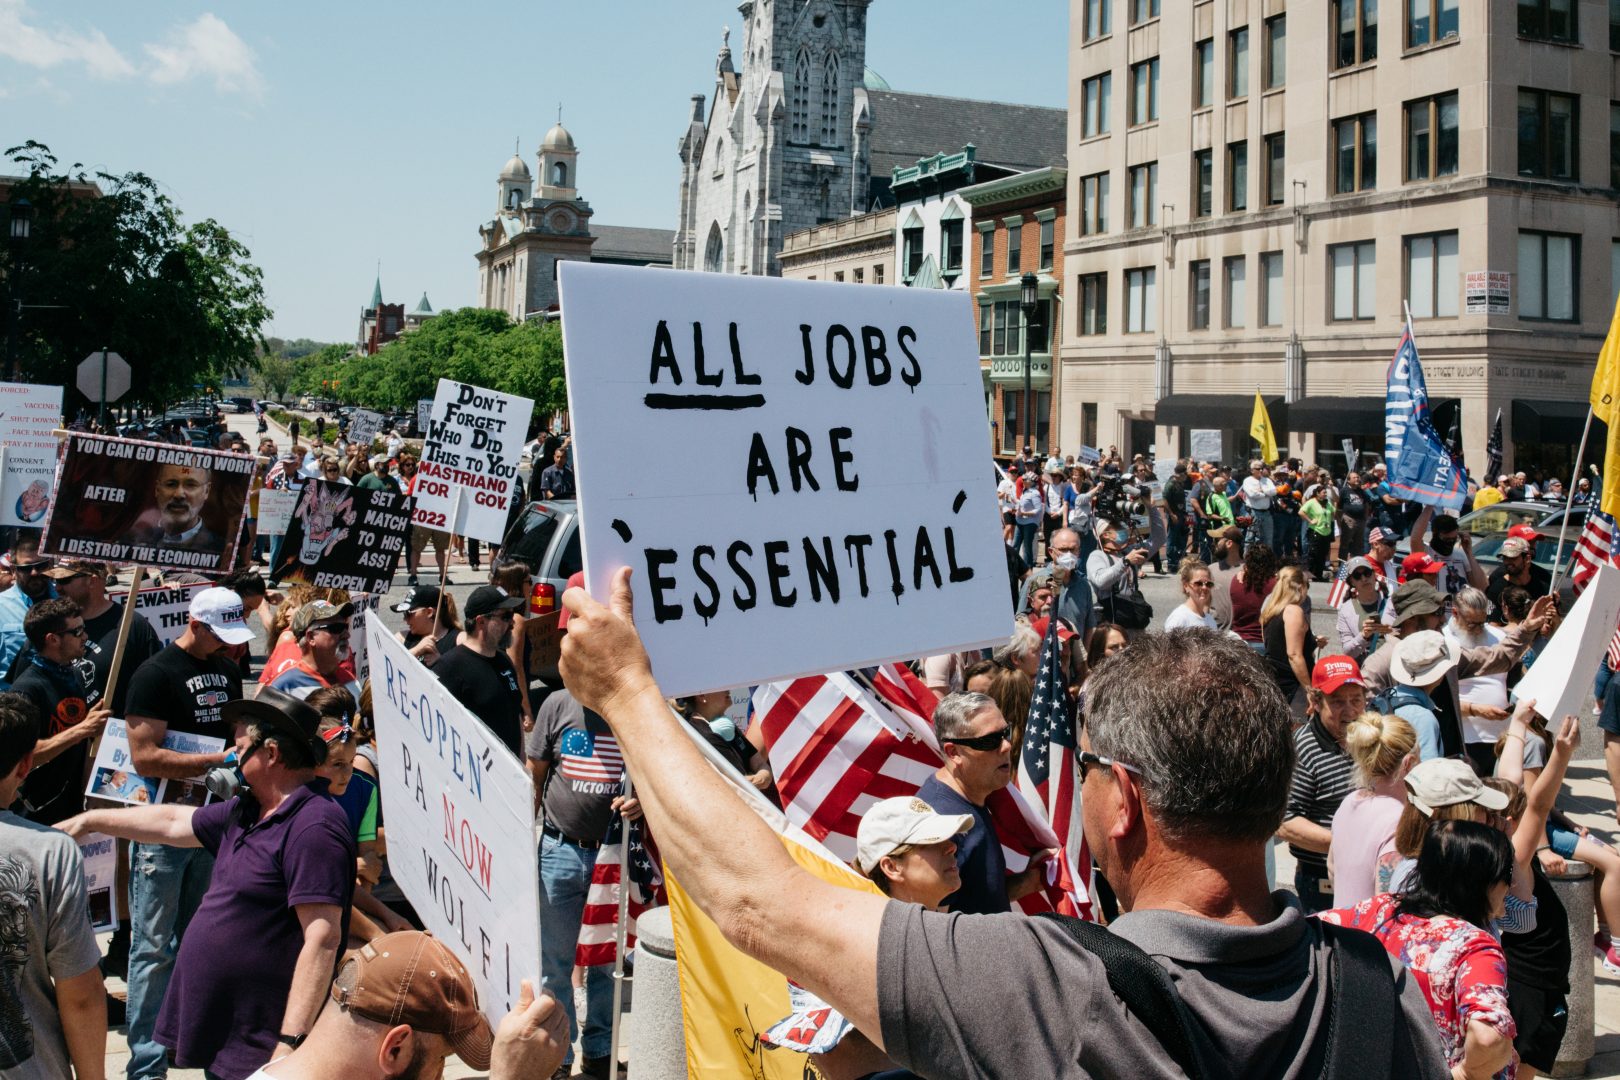 FILE PHOTO: Protesters hold signs during a May 15, 2020, rally outside the state capitol in Harrisburg, Pa. About 1,000 people showed up to protest Gov. Wolf's coronavirus shutdown order.